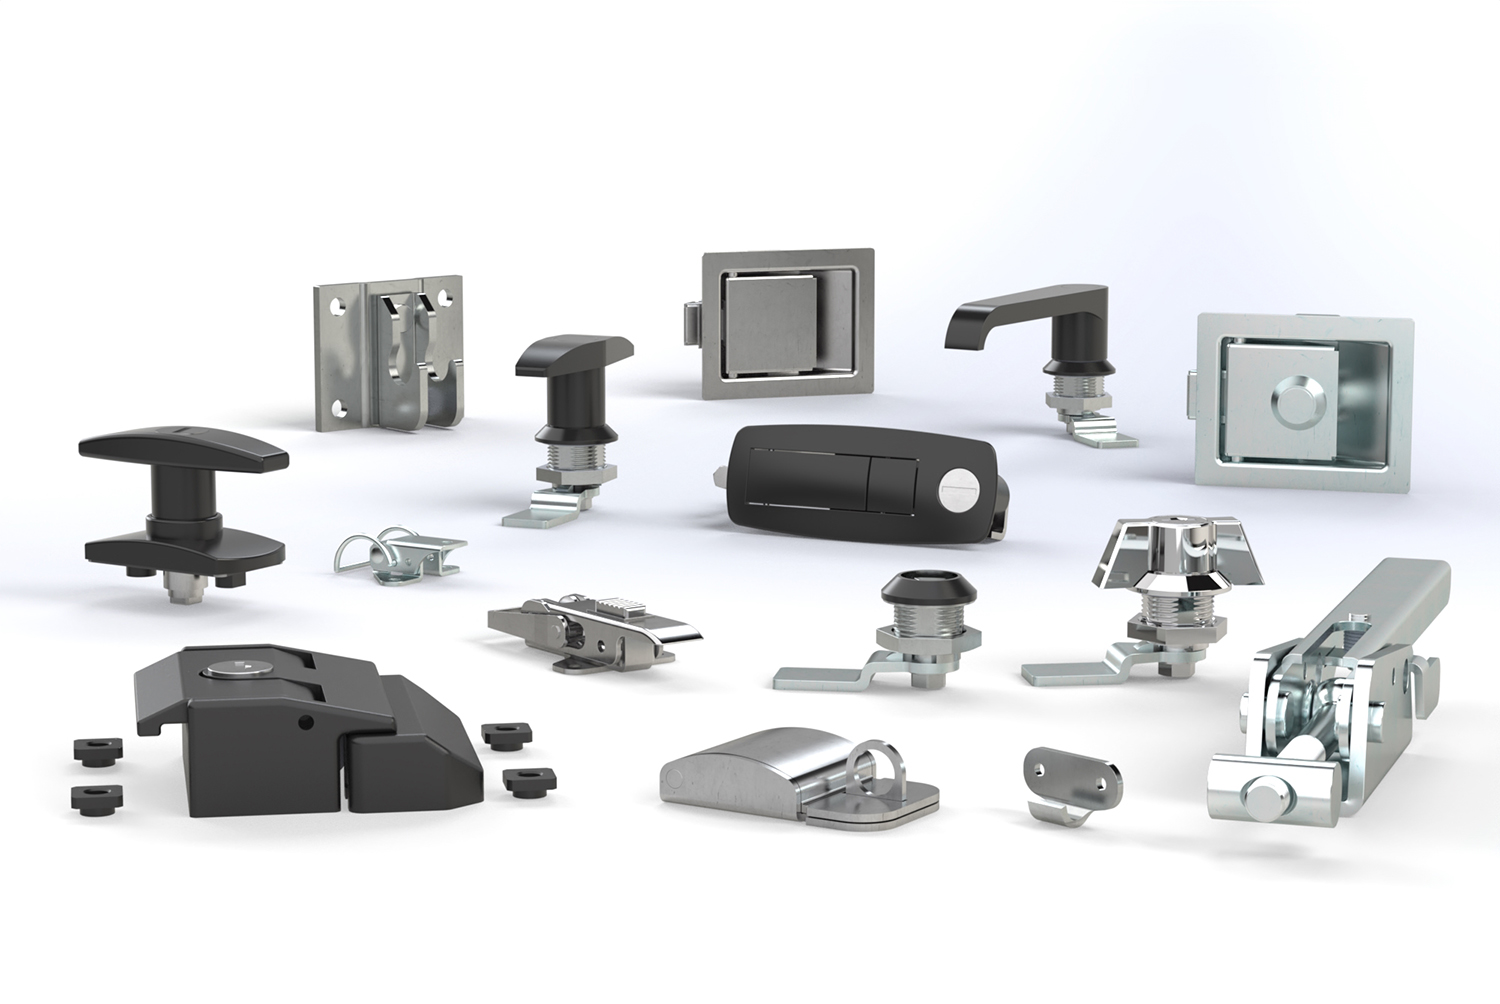 WDS Components the UK standard parts manufacturer and supplier can also offer specification advice and provide customisation for enclosure OEMs.